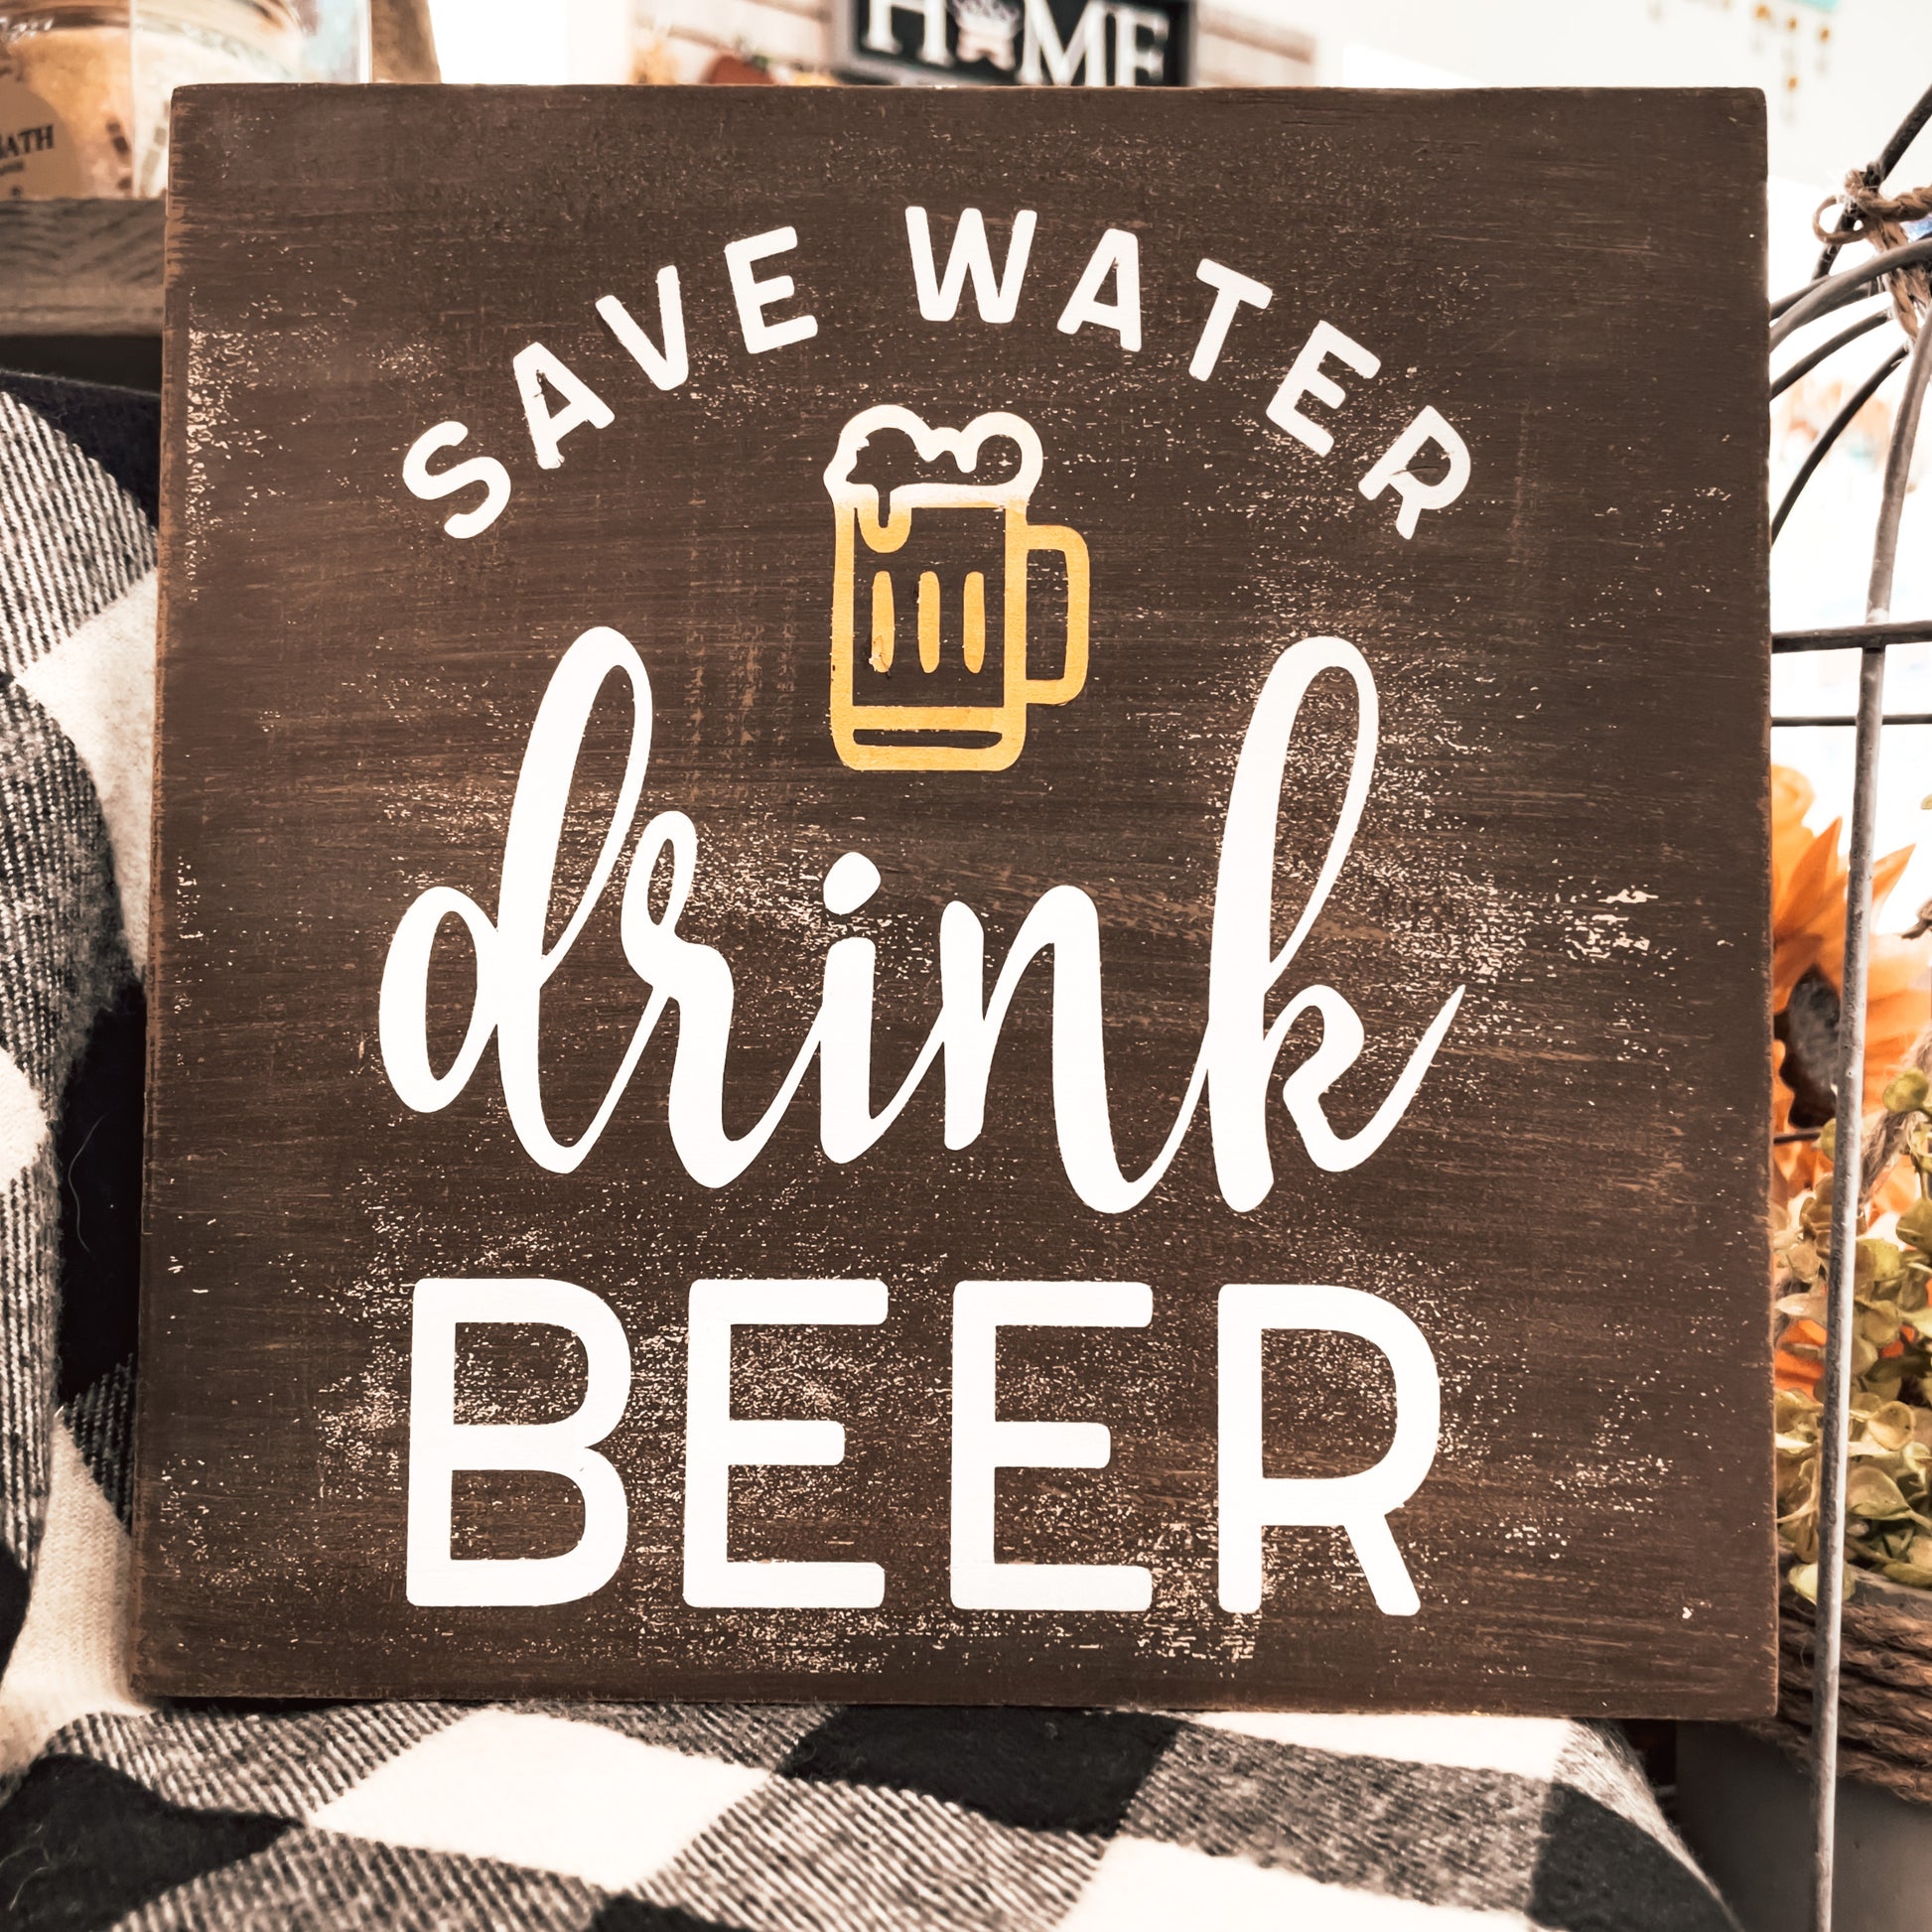 Save Water Drink Beer: MINI DESIGN - Paisley Grace Makery